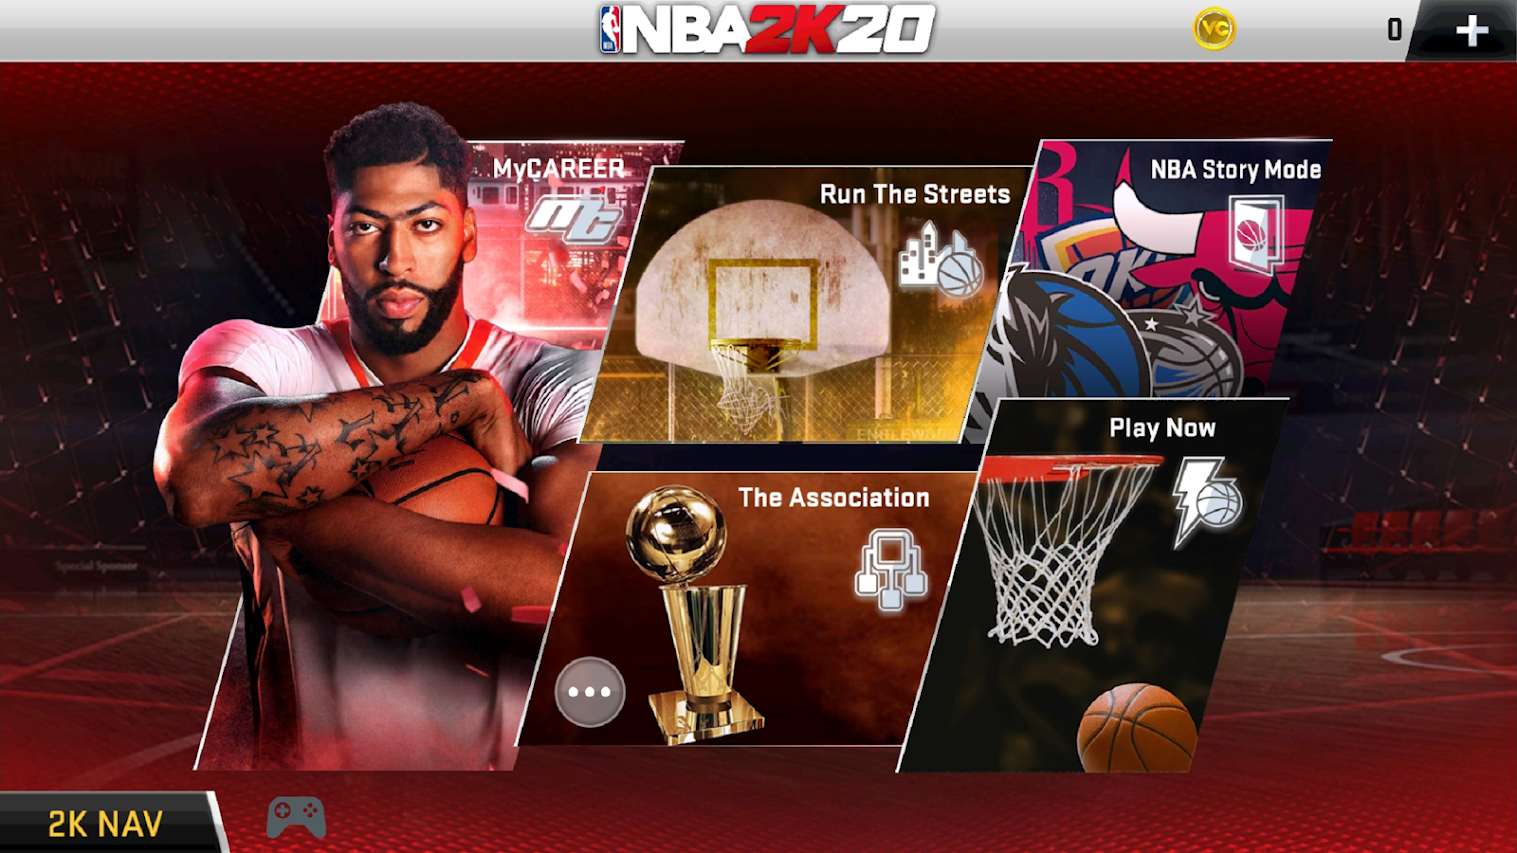 NBA 2K20 is available on the Play Store, complete with controller support